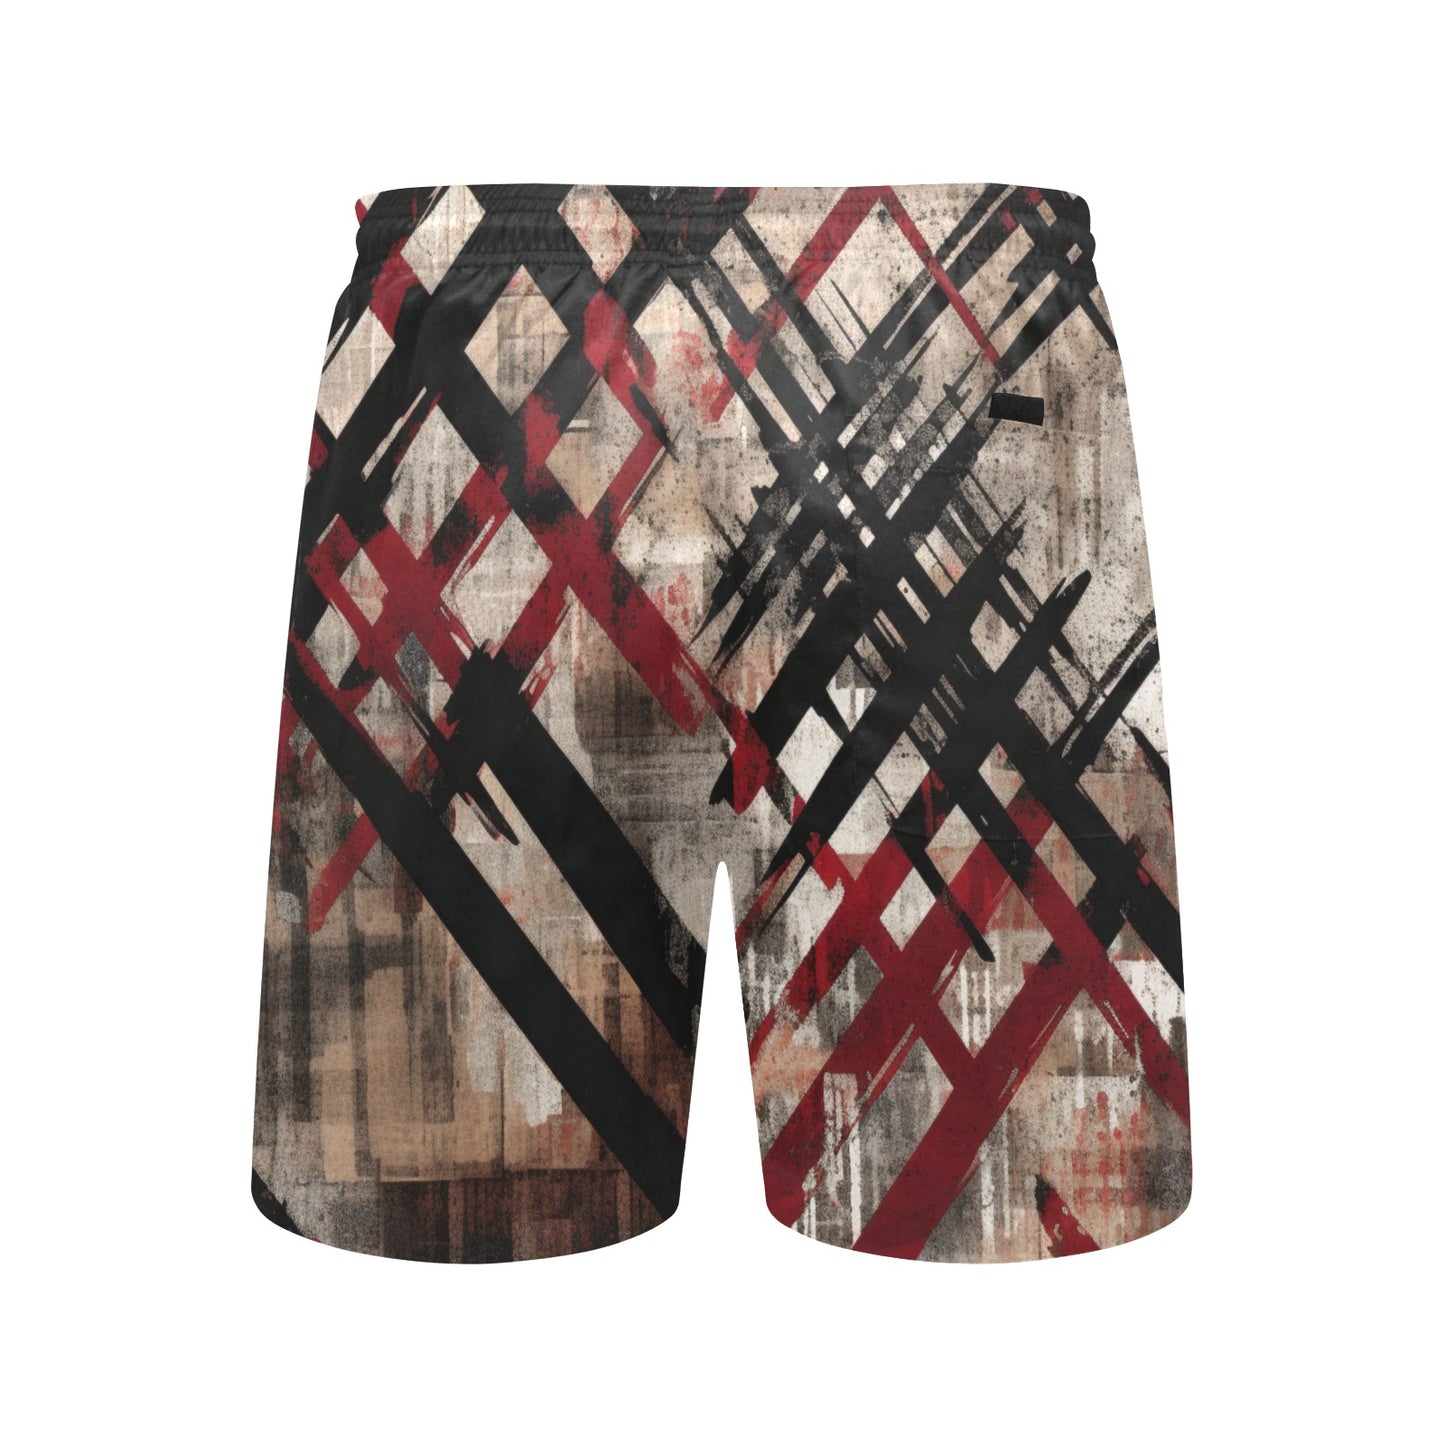 Black And Red Strike Pattern Beach Shorts